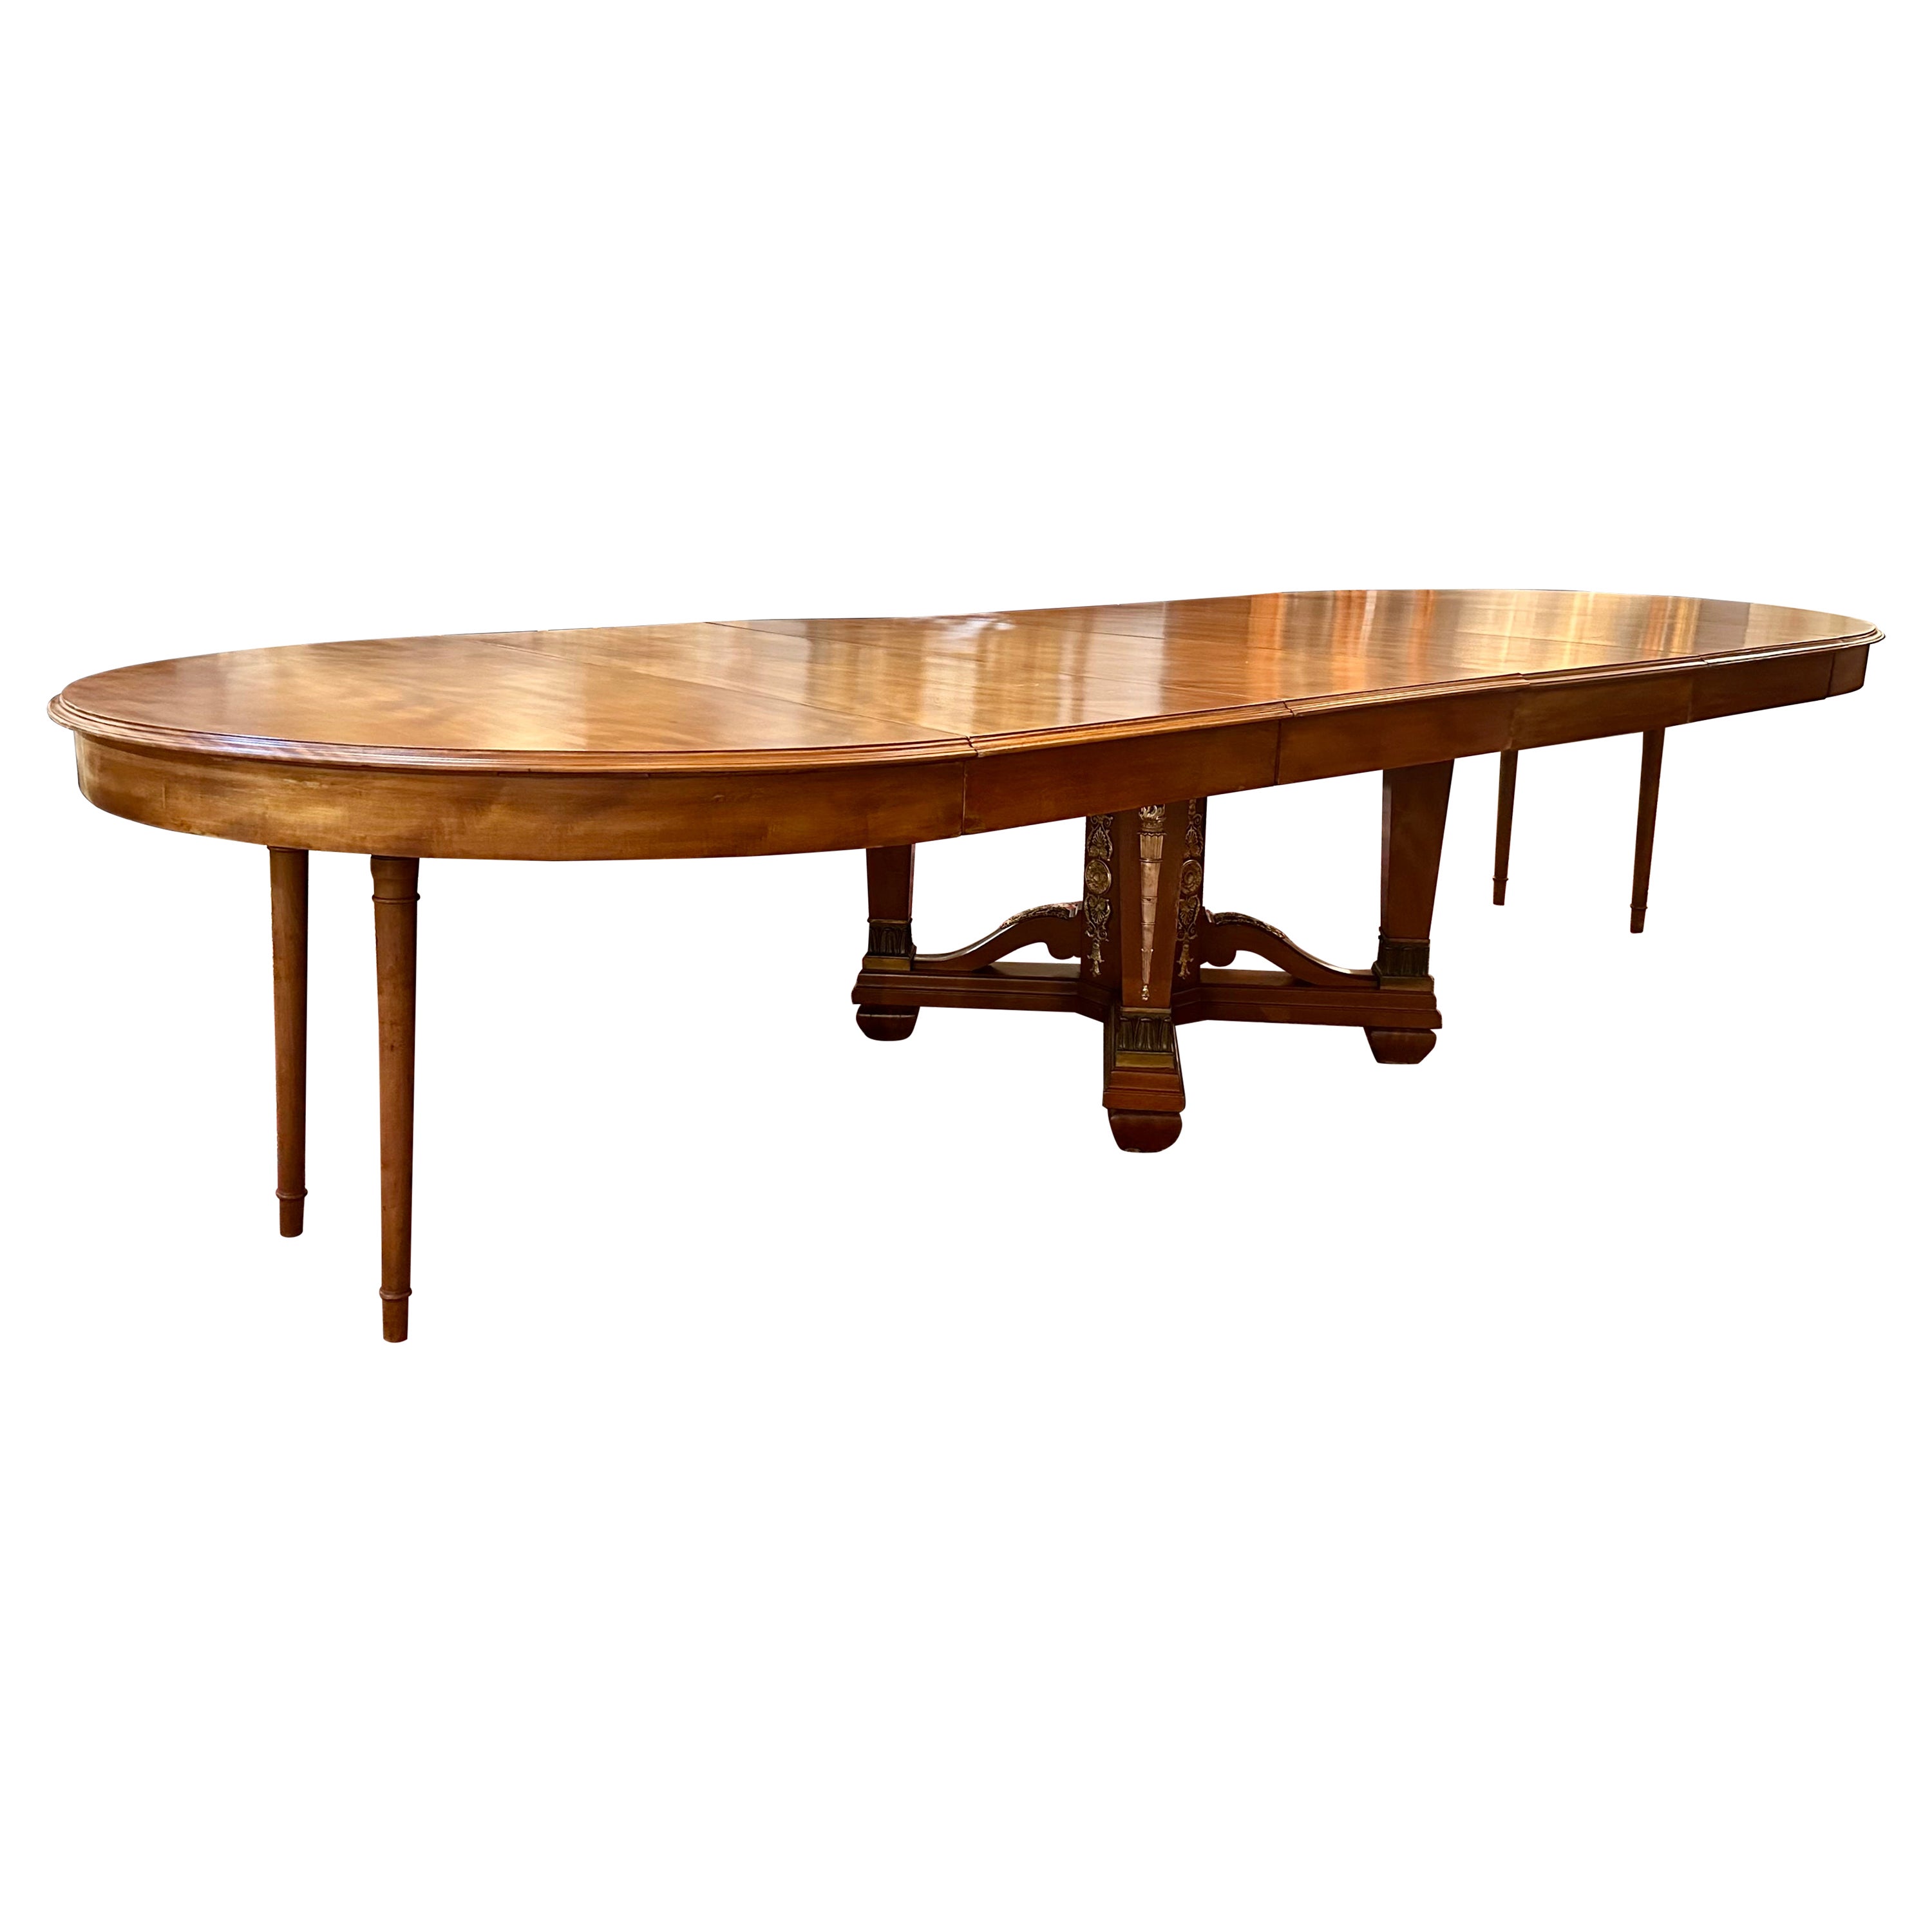 Antique French Empire Bronze D' Ore Mounted Mahogany Dining Table, Circa 1890. For Sale